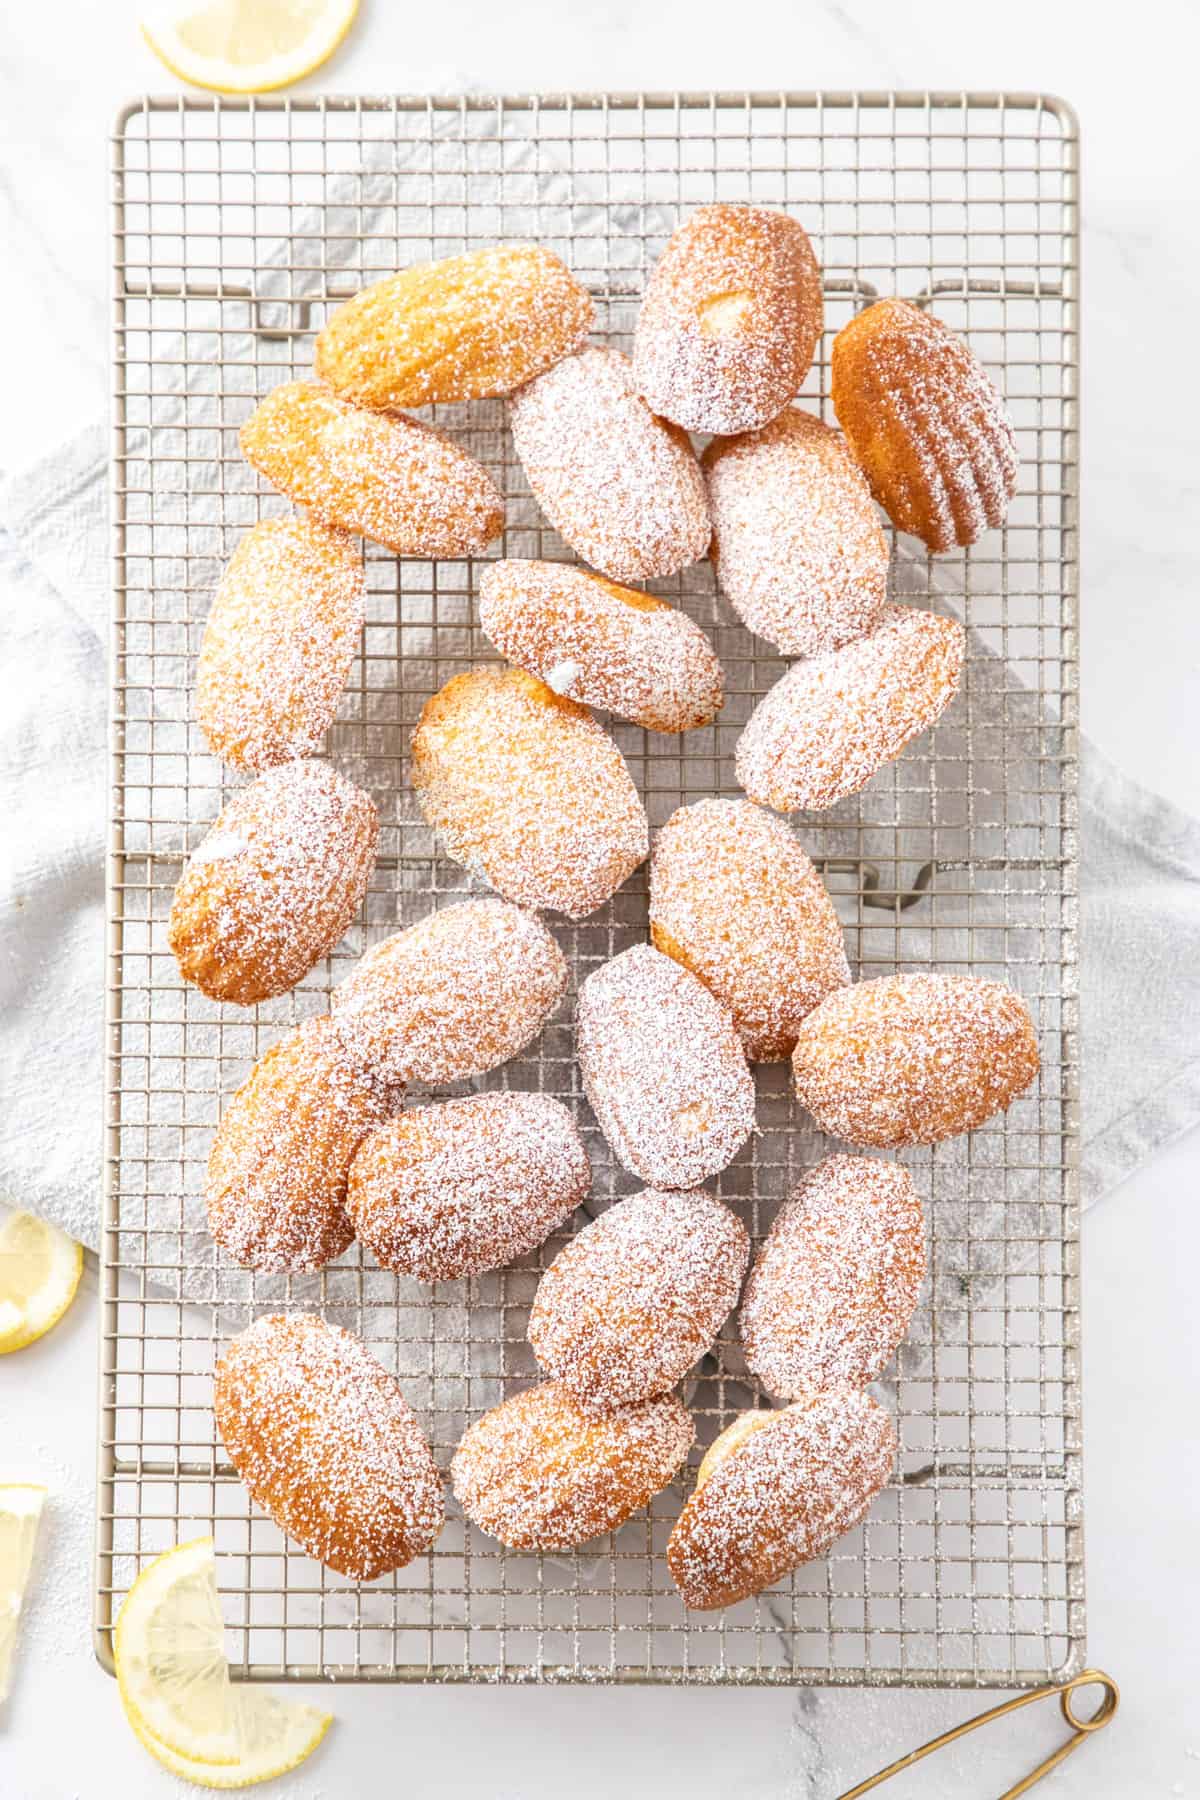 Overhead shot of Madeleines dusted with icing sugar sitting on a cooling rack.